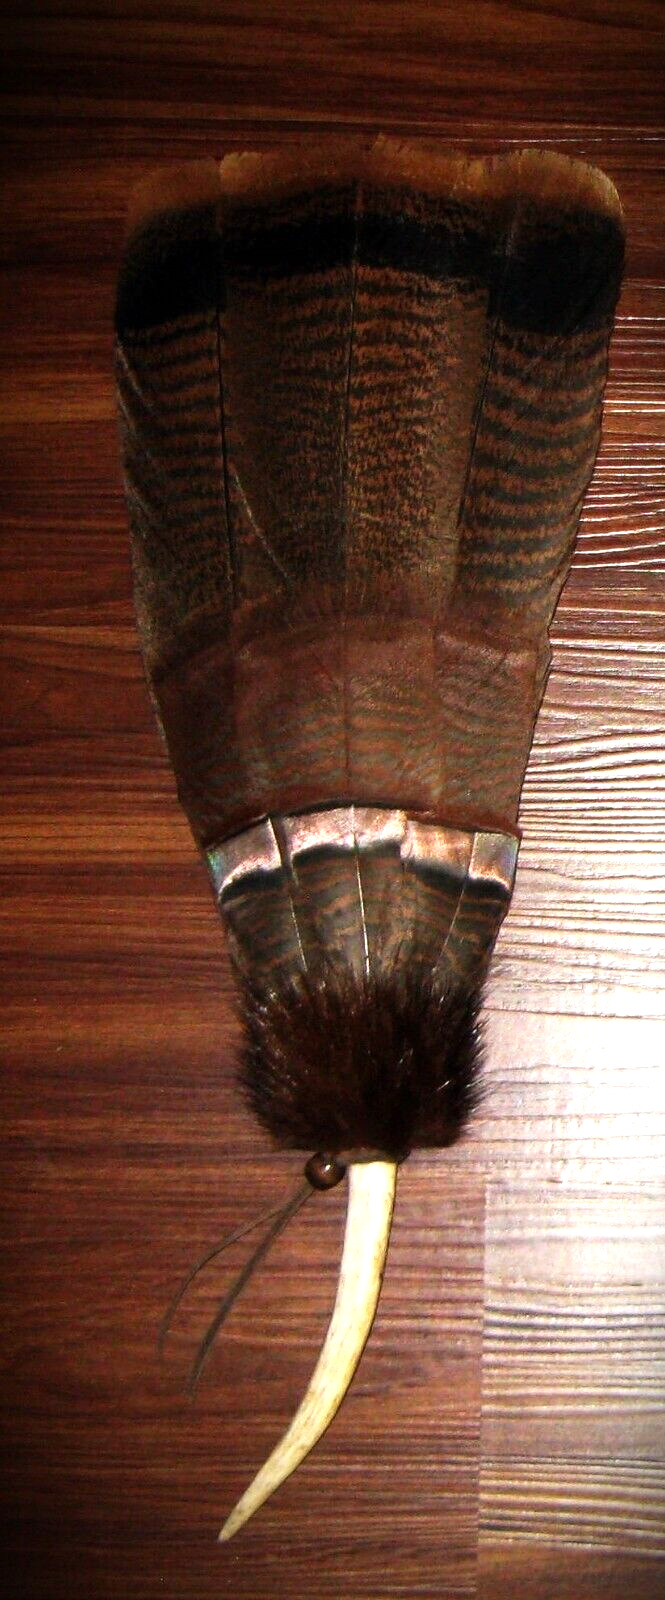 TURKEY NATIVE AMERICAN SMUDGE FAN FEATHER ANTLER CEREMONIAL